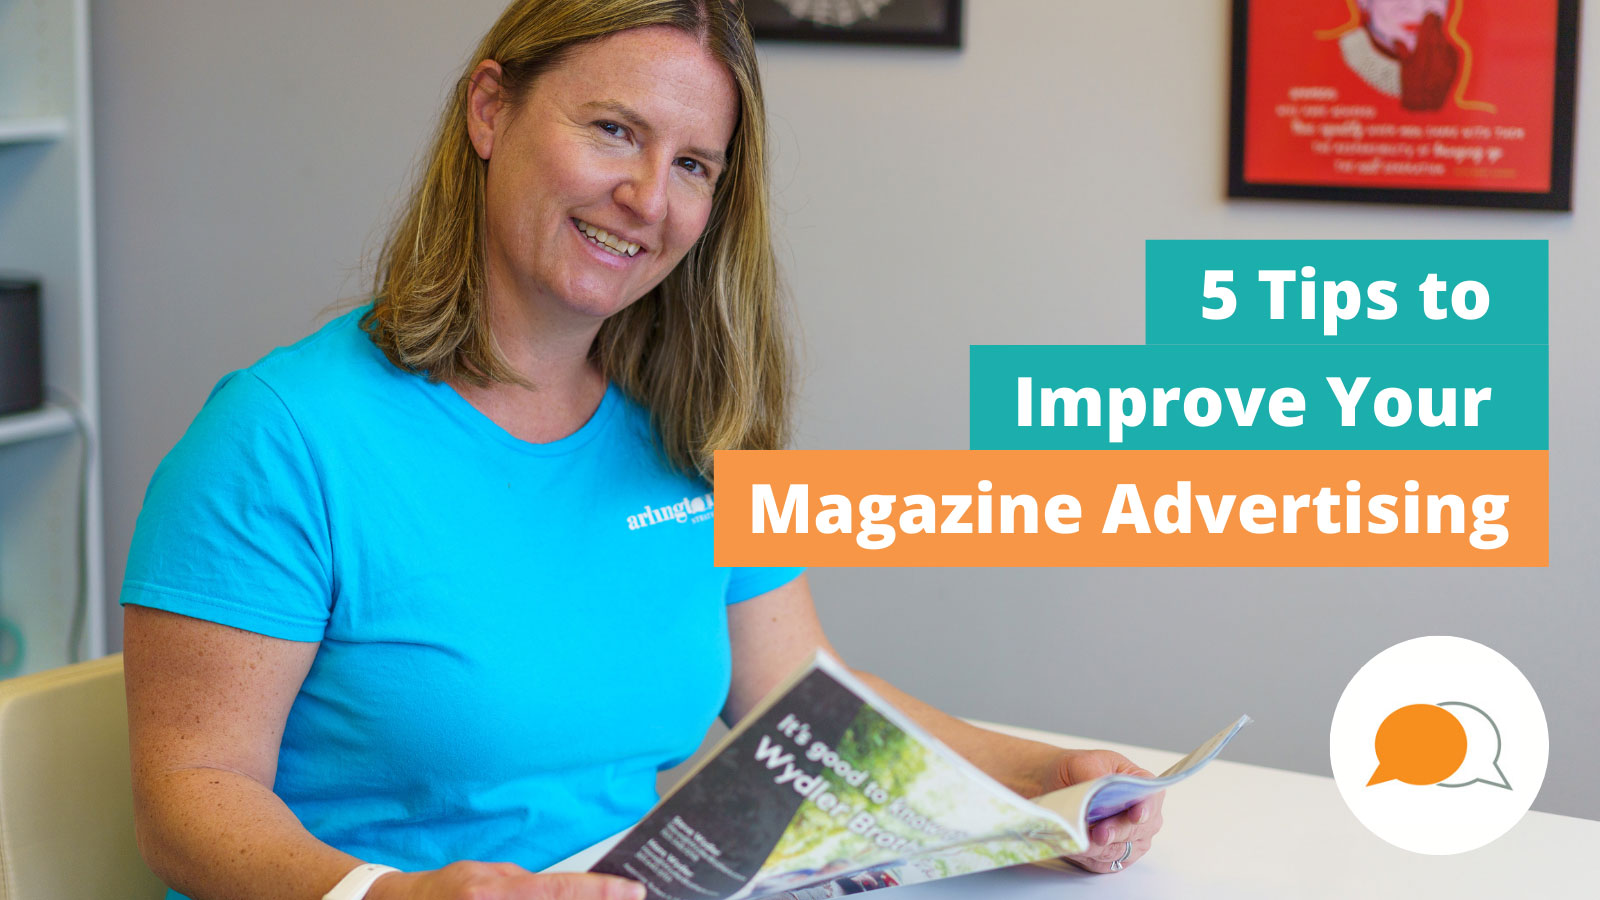 5 Tips to Improve Your Magazine Advertising